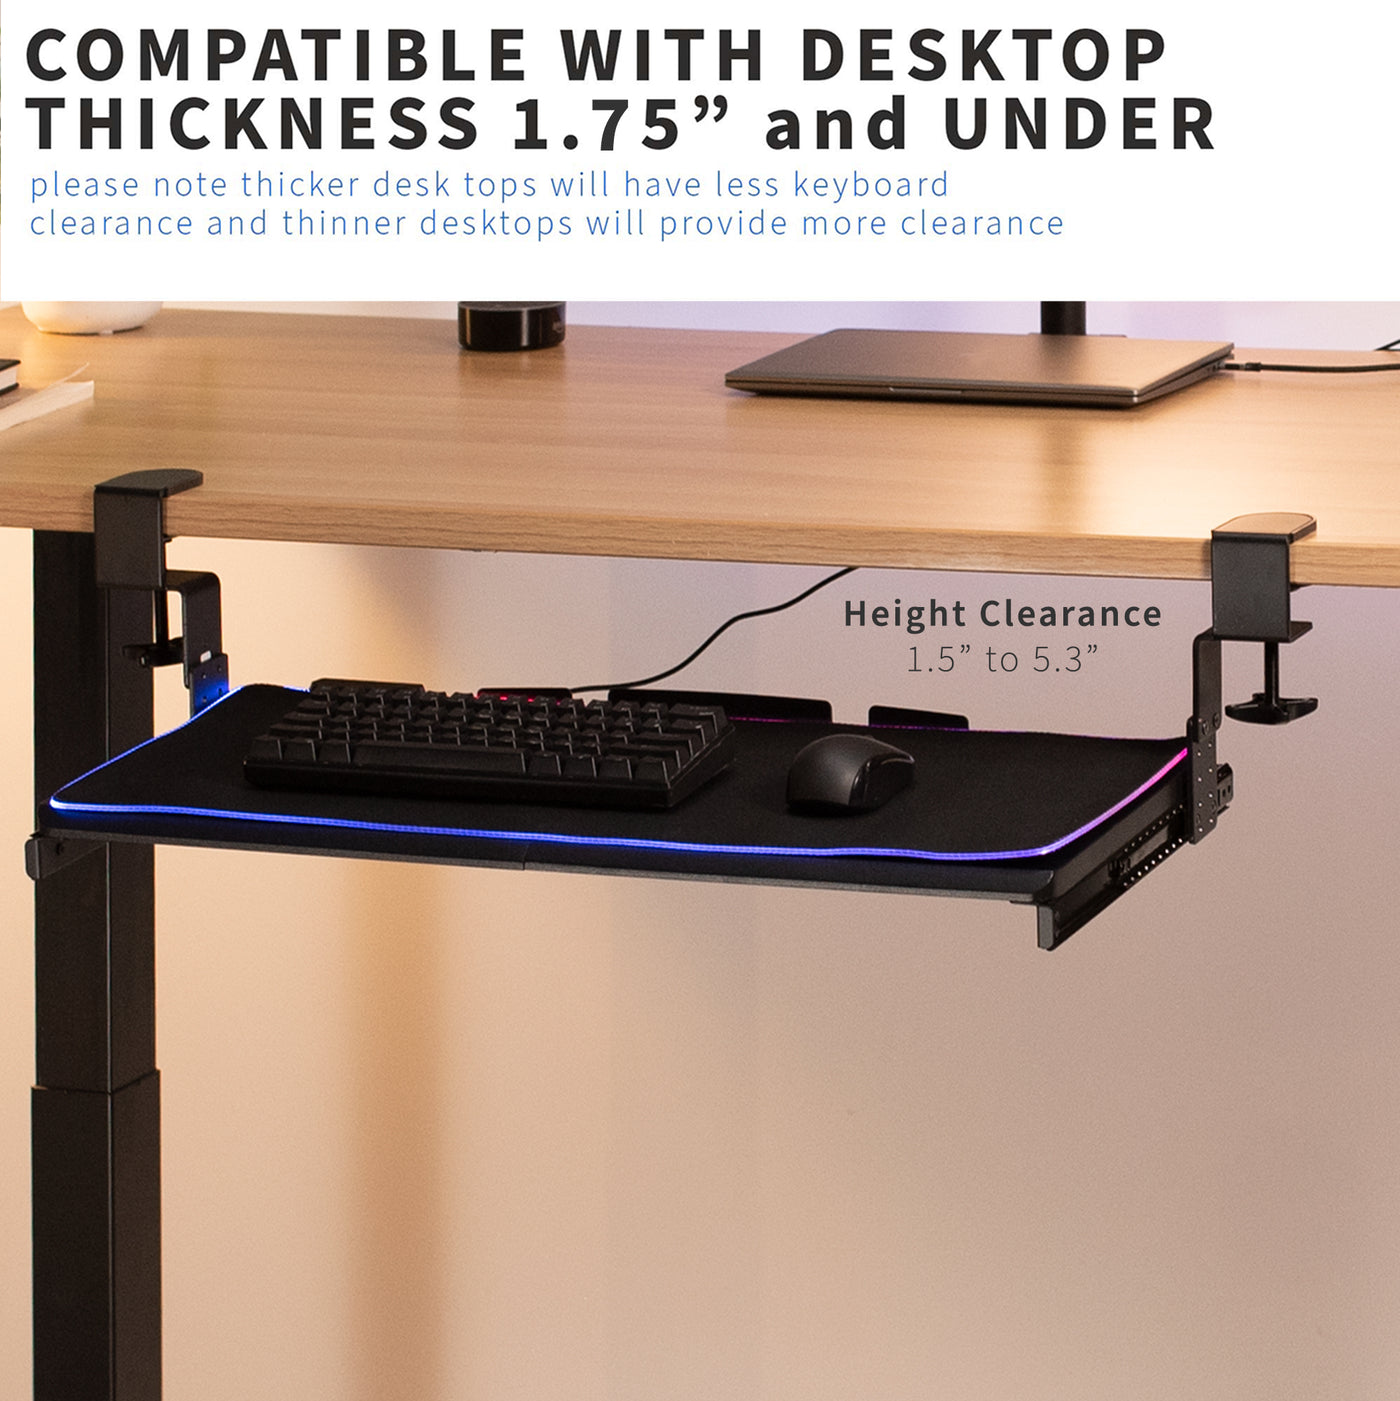 Clamp-on height adjustable pullout keyboard tray attachment.